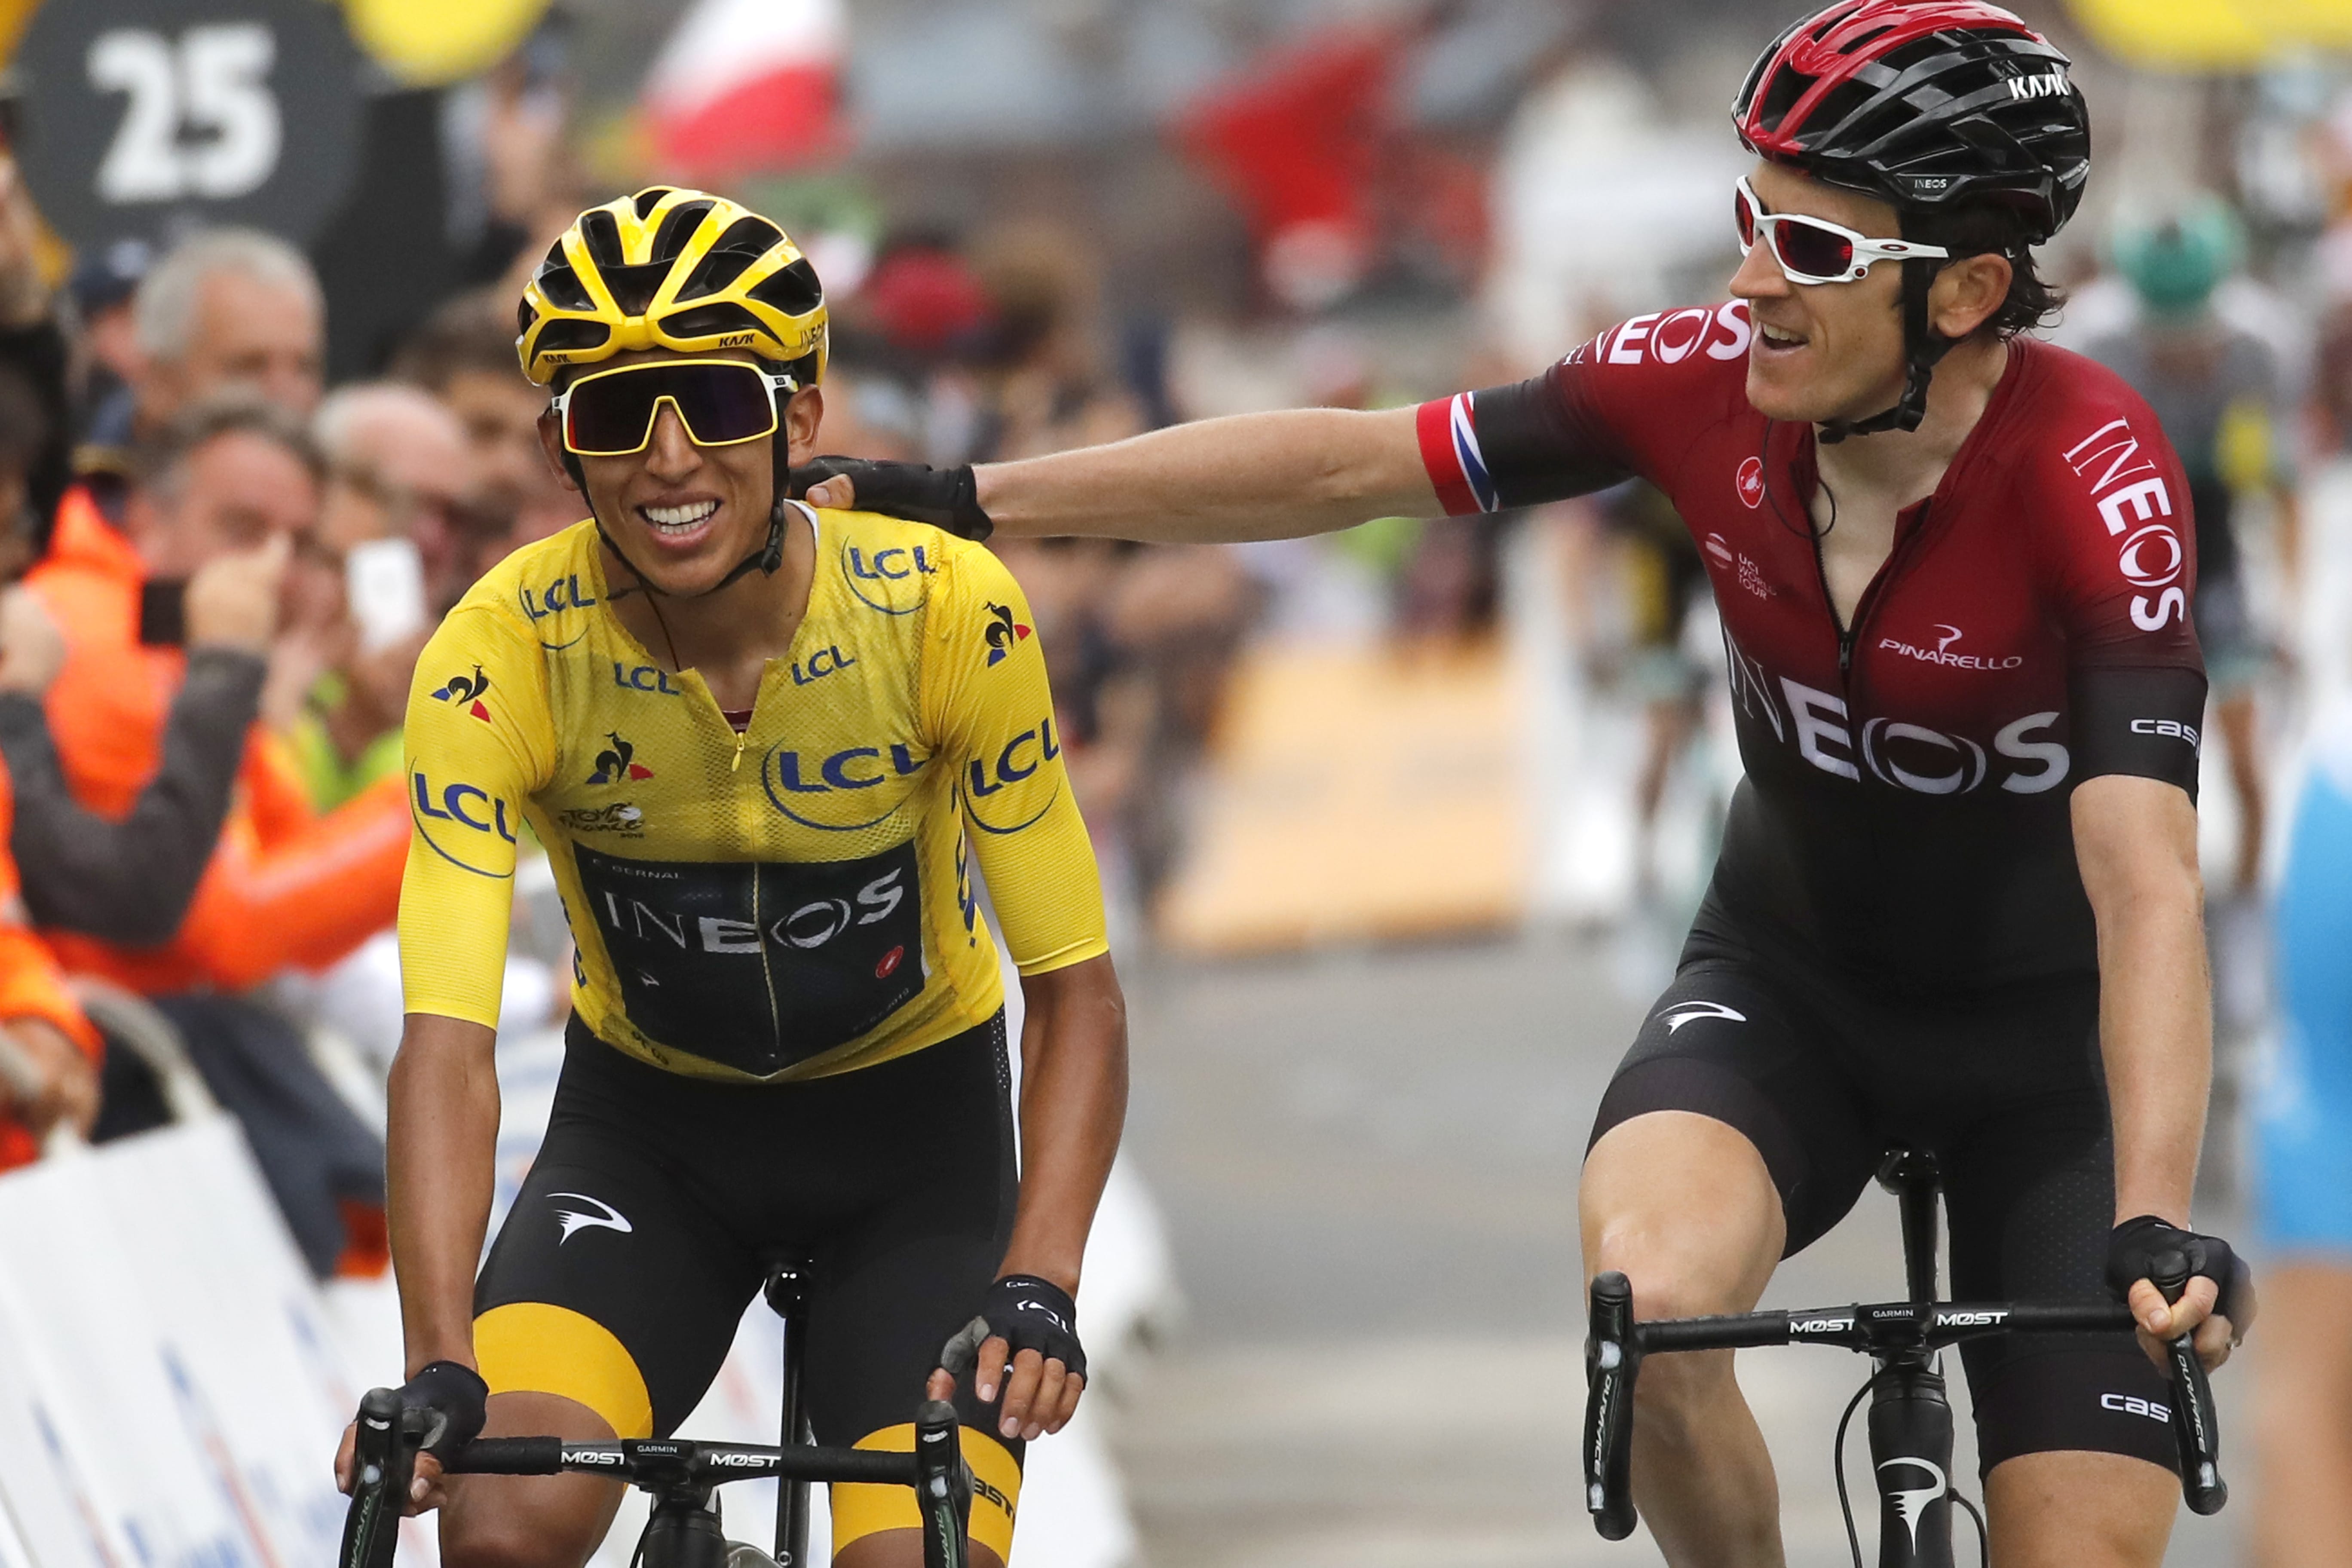 Britain's Geraint Thomas, right, congratulates Colombia's Egan Bernal wearing the overall leader's yellow jersey as they crosses the finish line of the 20th stage of the Tour de France cycling race over 59,5 kilometers (36,97 miles) with start in Albertville and finish in Val Thorens, France, Saturday, July 27, 2019.